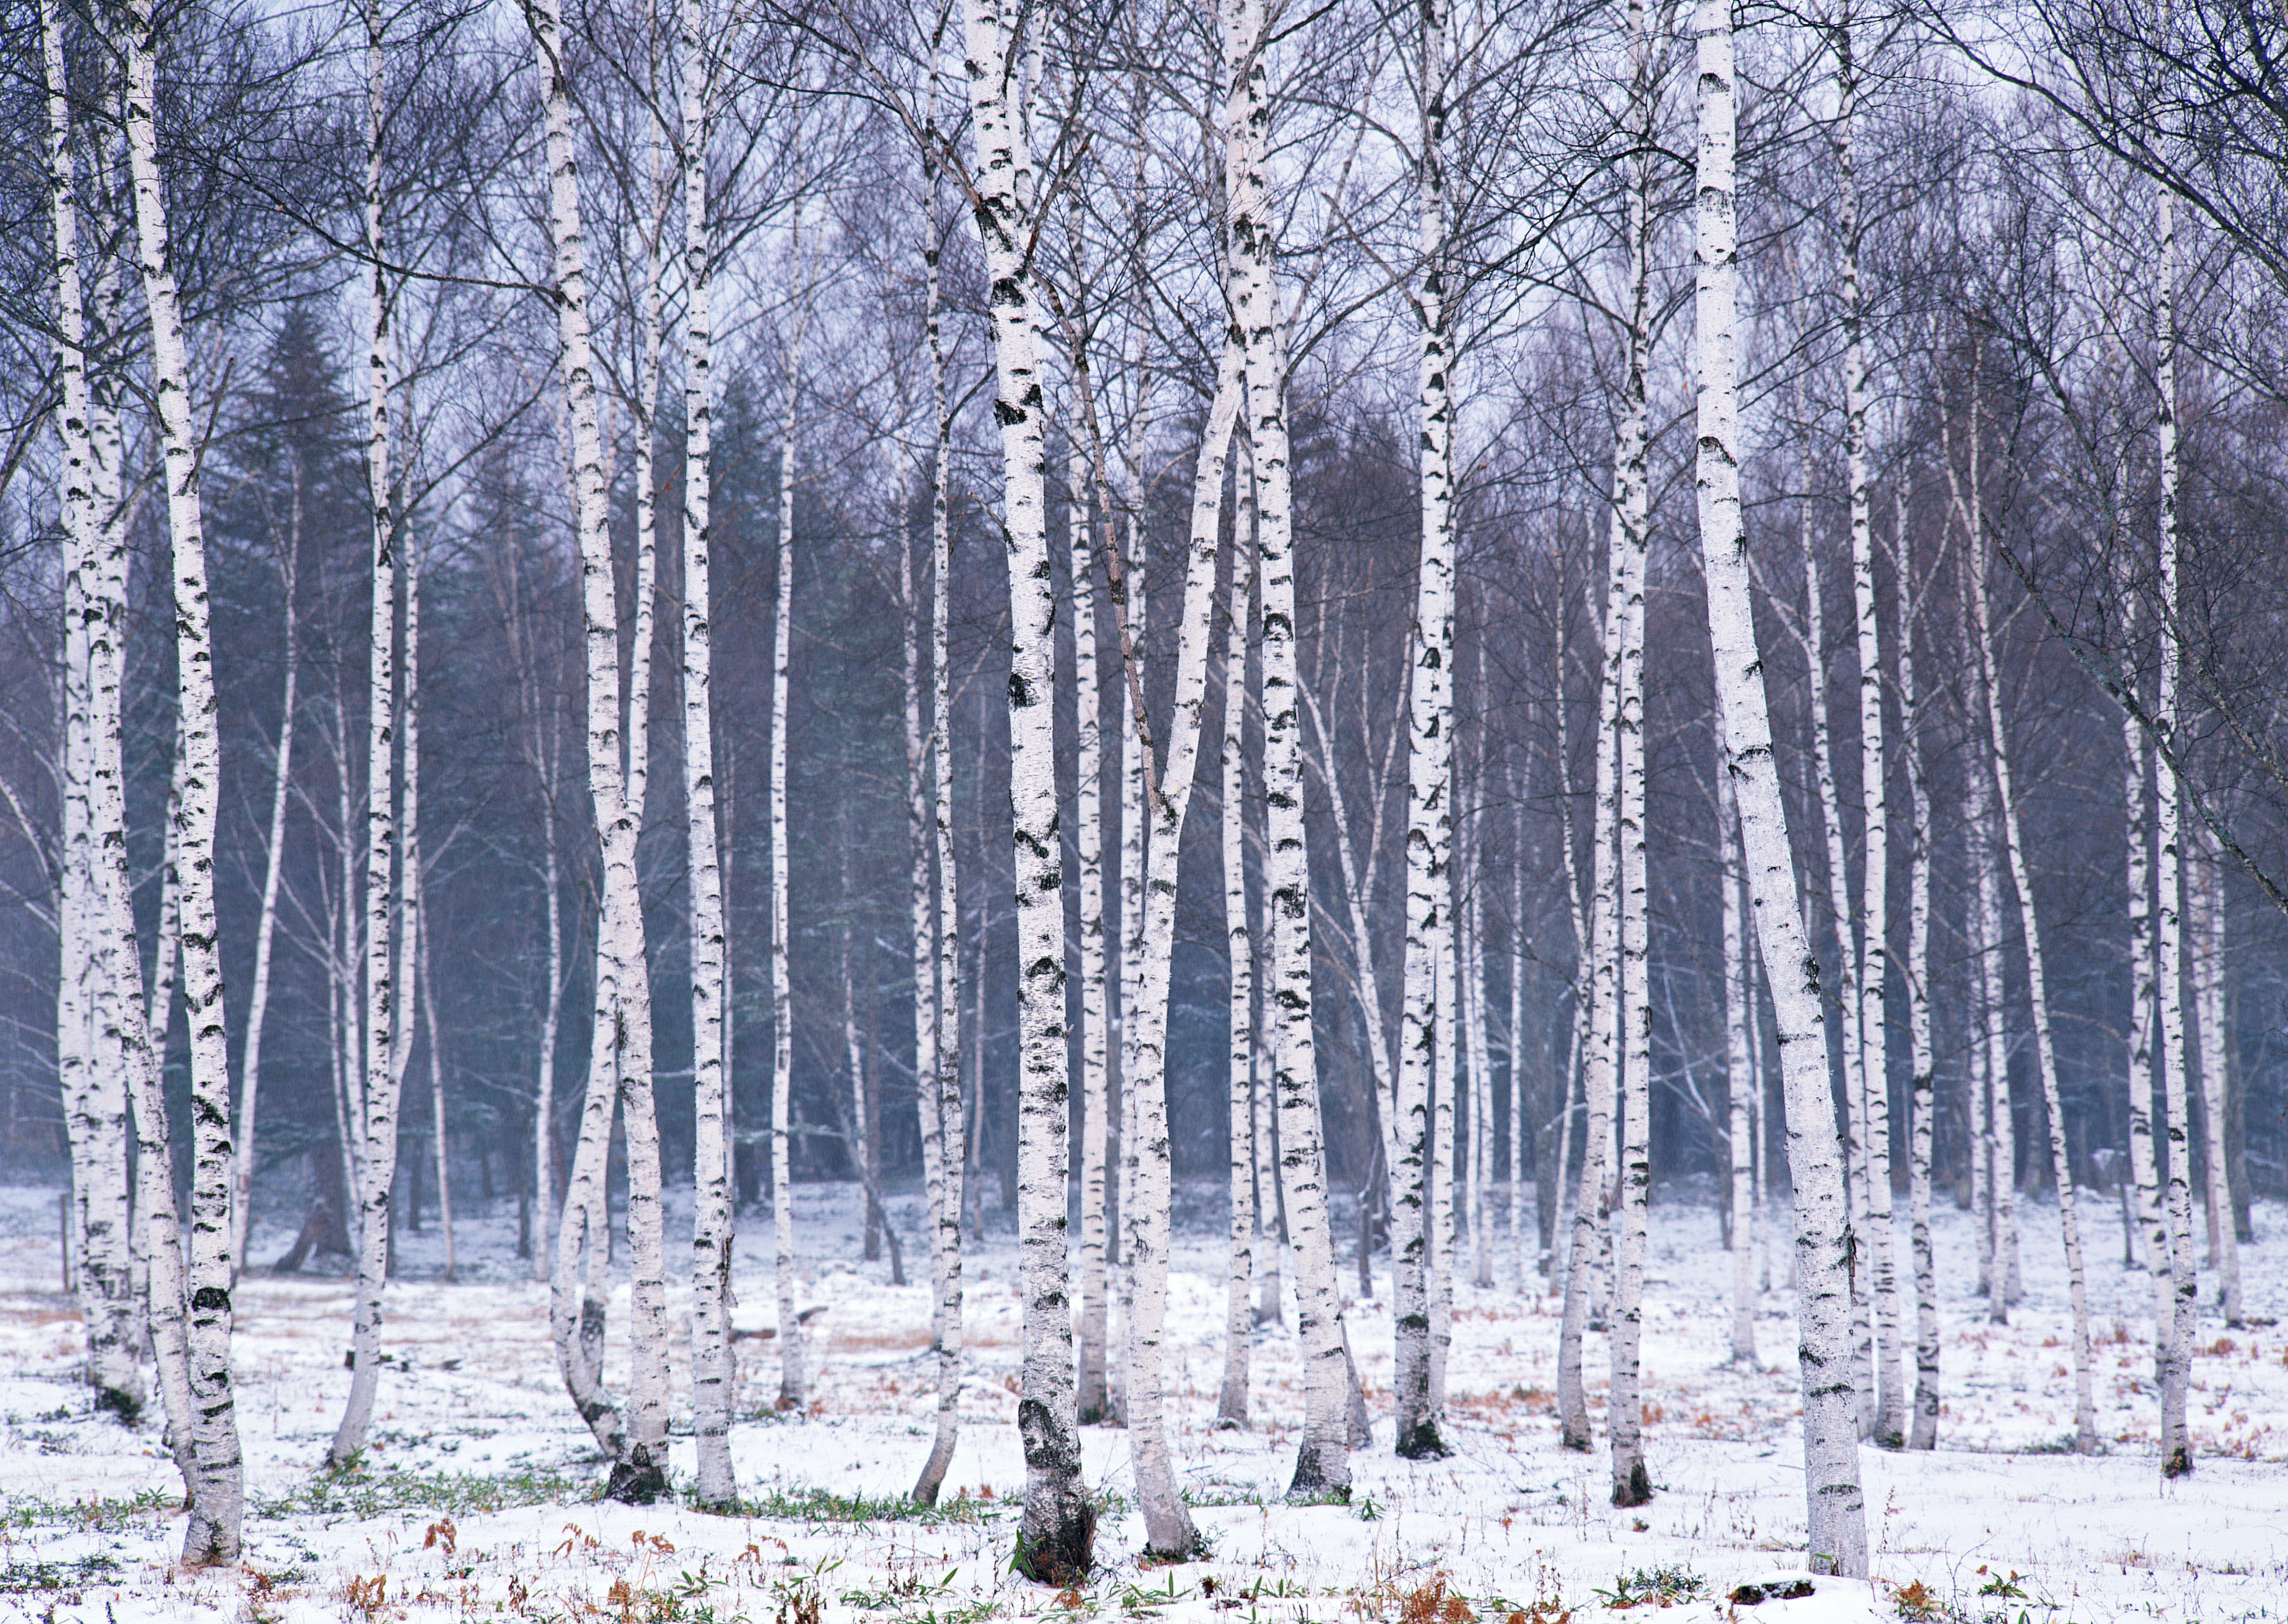 So these are the Birch Tree wallpapers that you can use as your